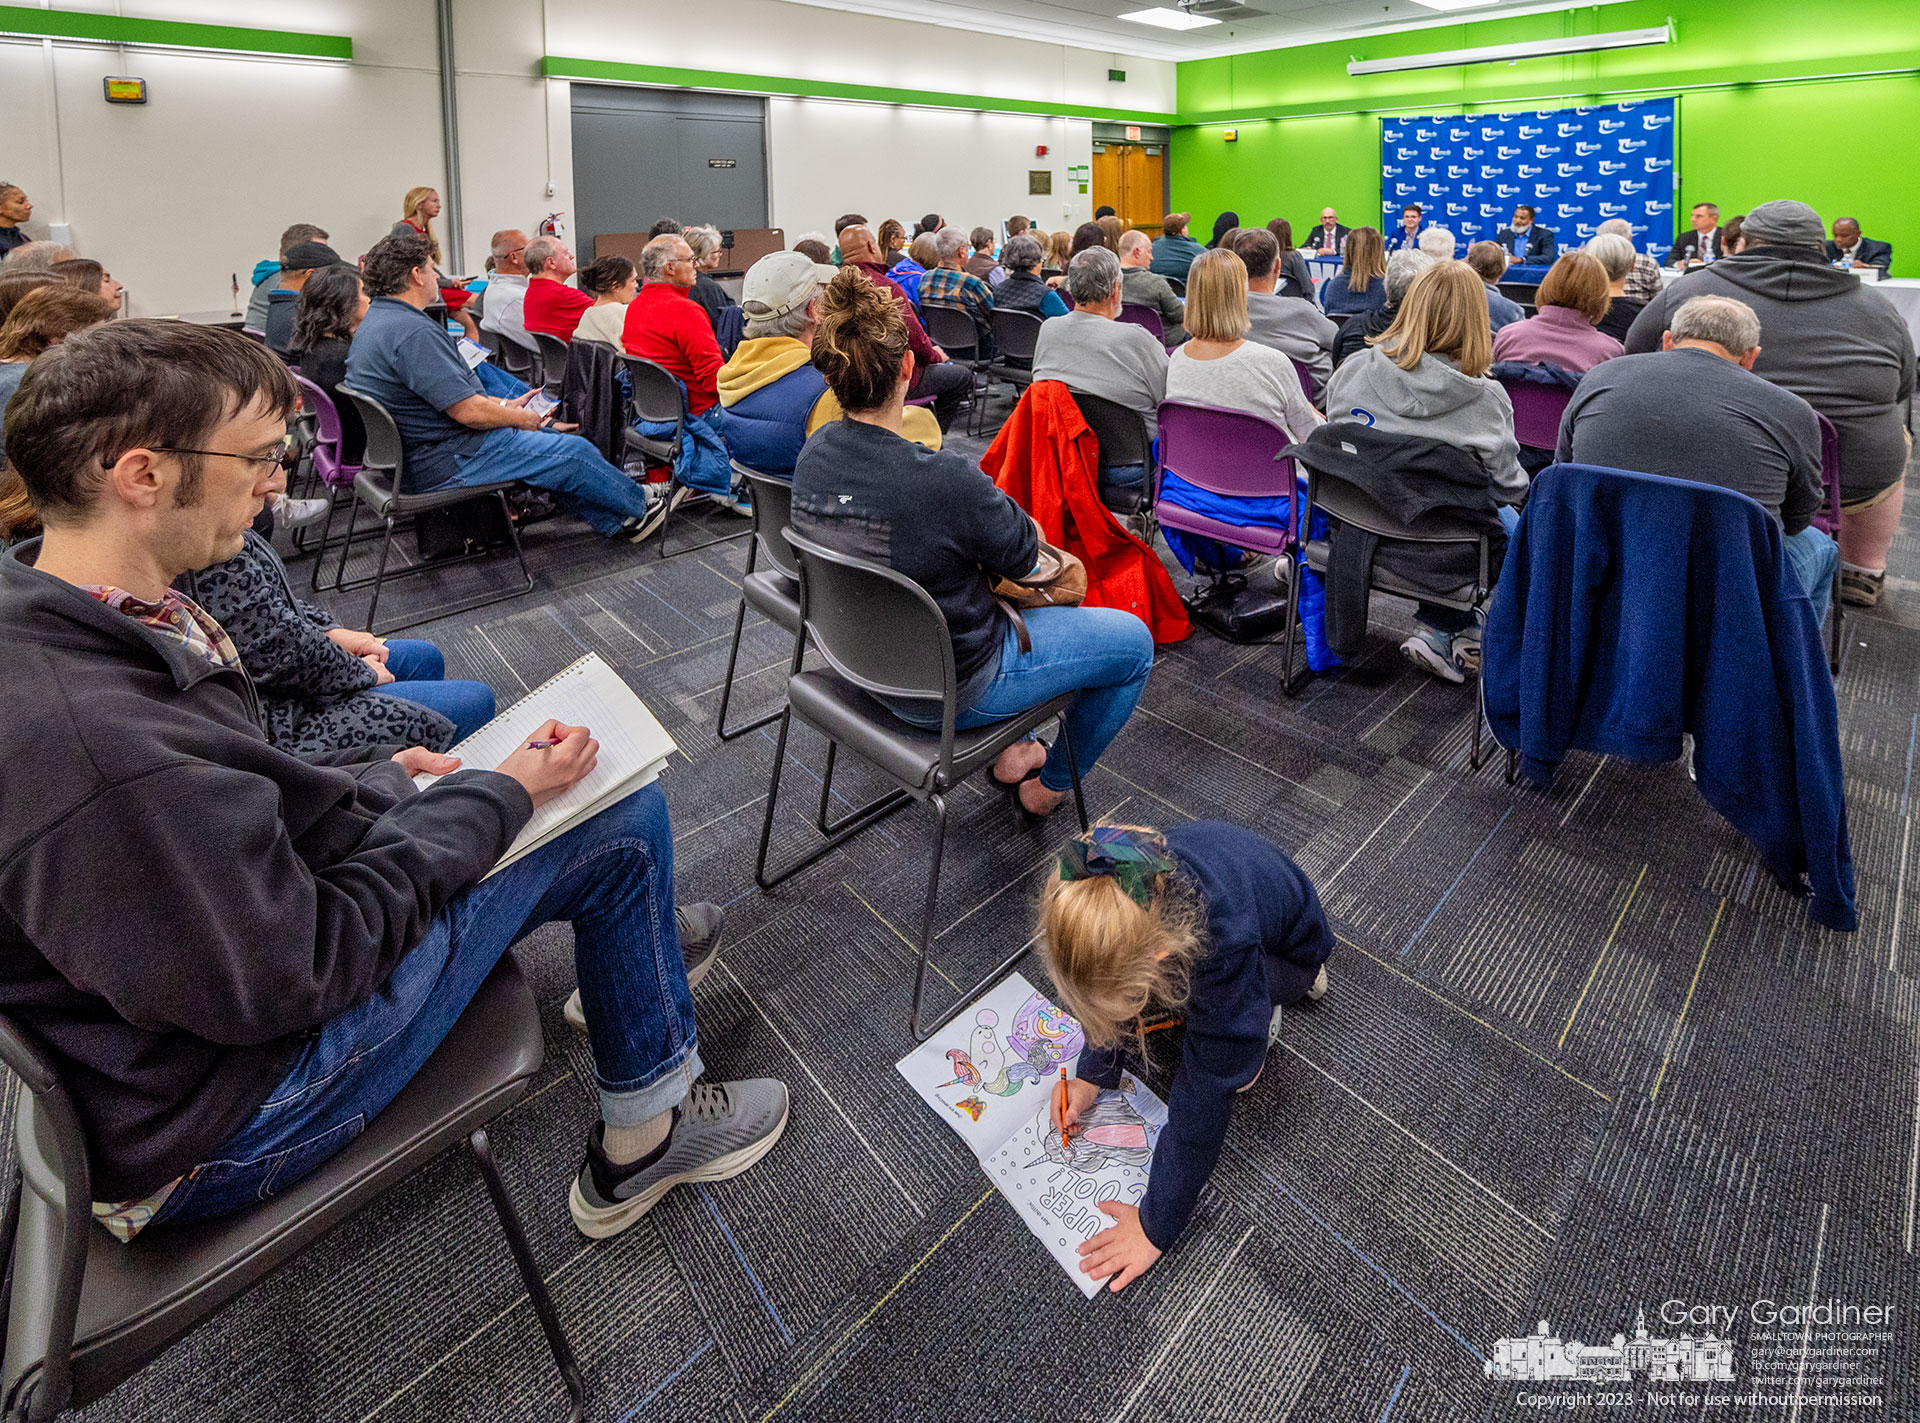 A toddler keeps herself busy coloring between the lines of her coloring book as a man in the audience takes notes during the Chamber of Commerece City Council Candidate Forum at the library. My Final Photo for October 9, 2023.